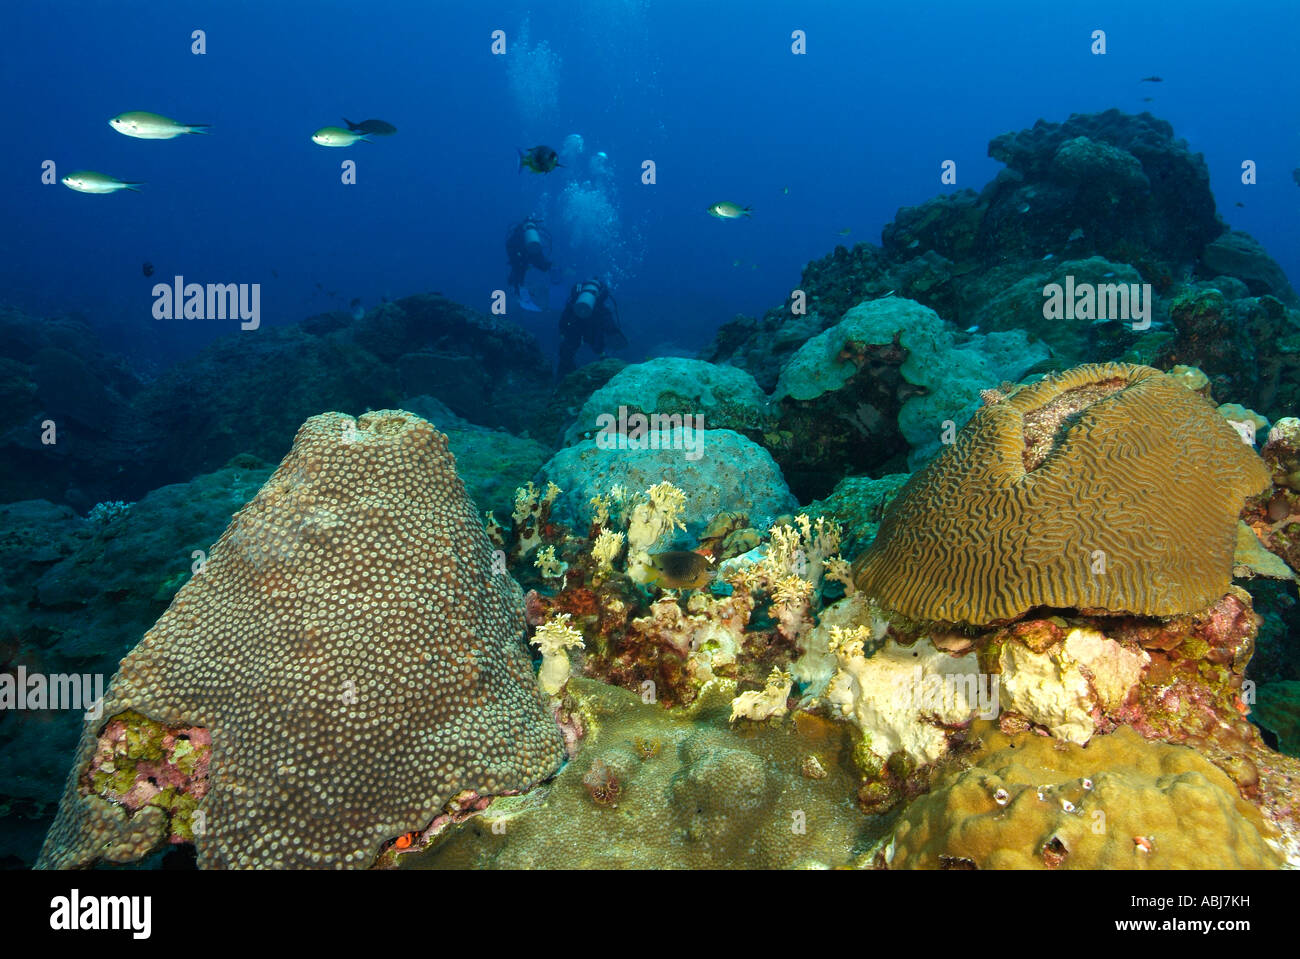 Coral scenary in the Gulf of Mexico off Texas Stock Photo